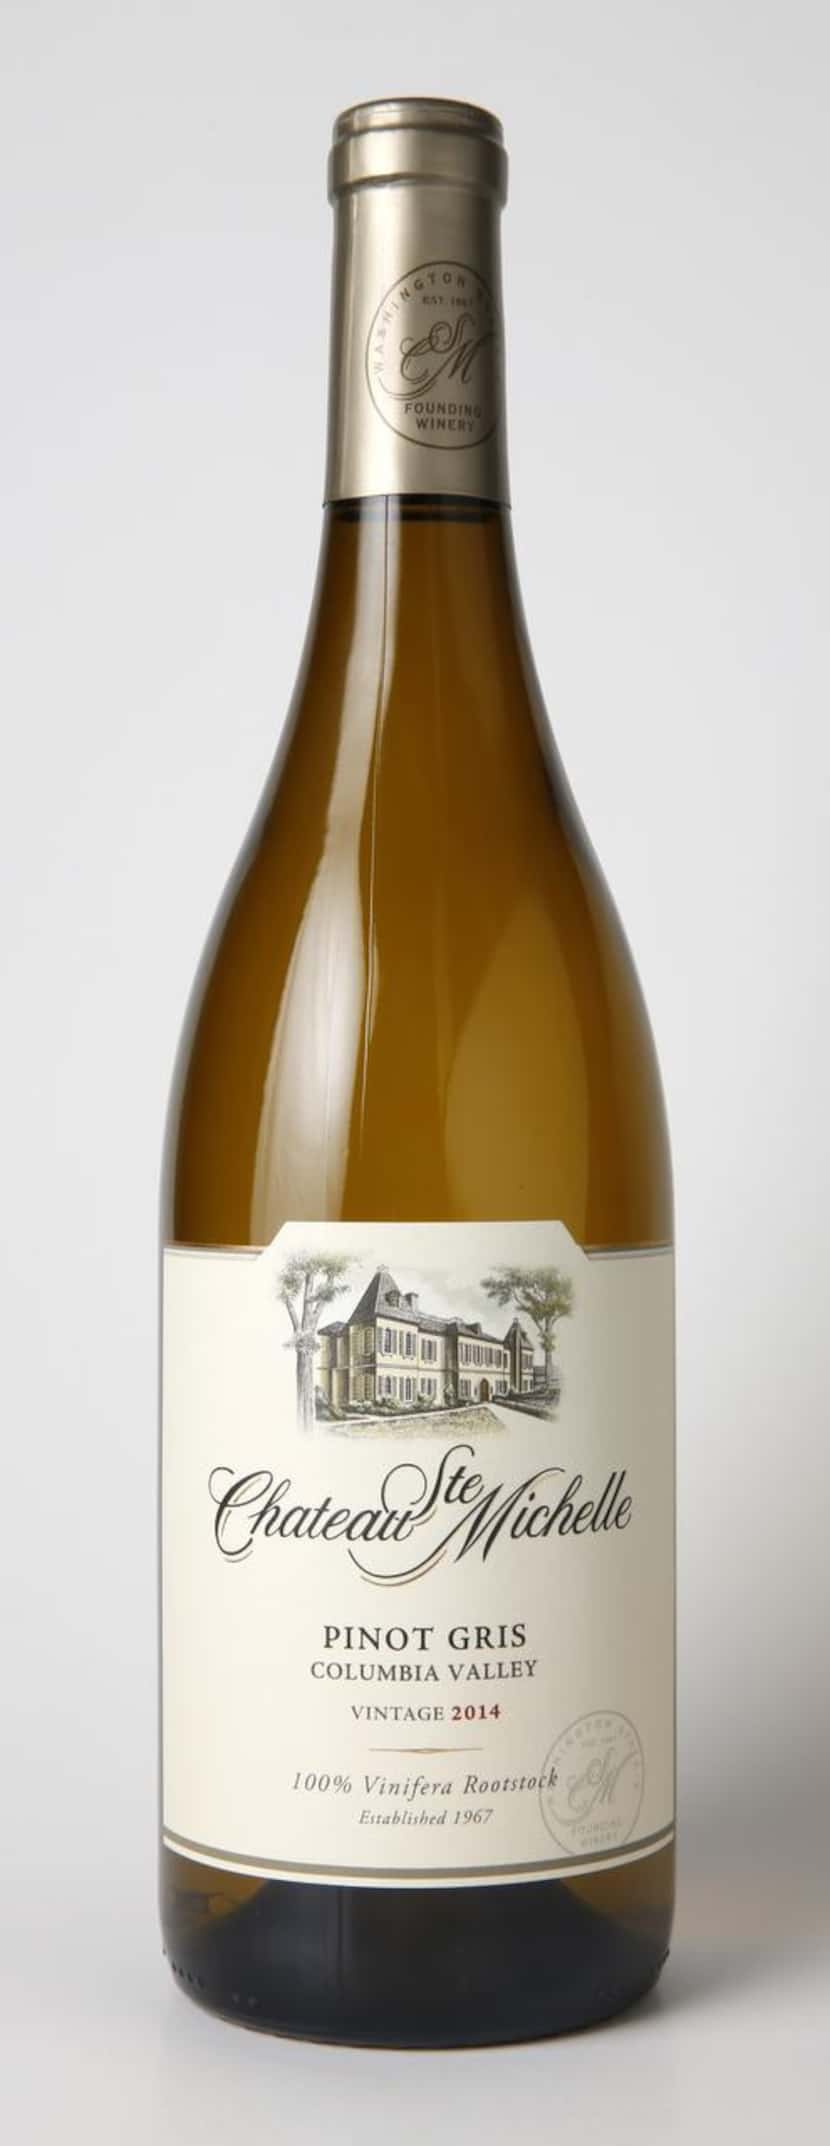 
Chateau Ste. Michelle Pinot Gris, 2014
